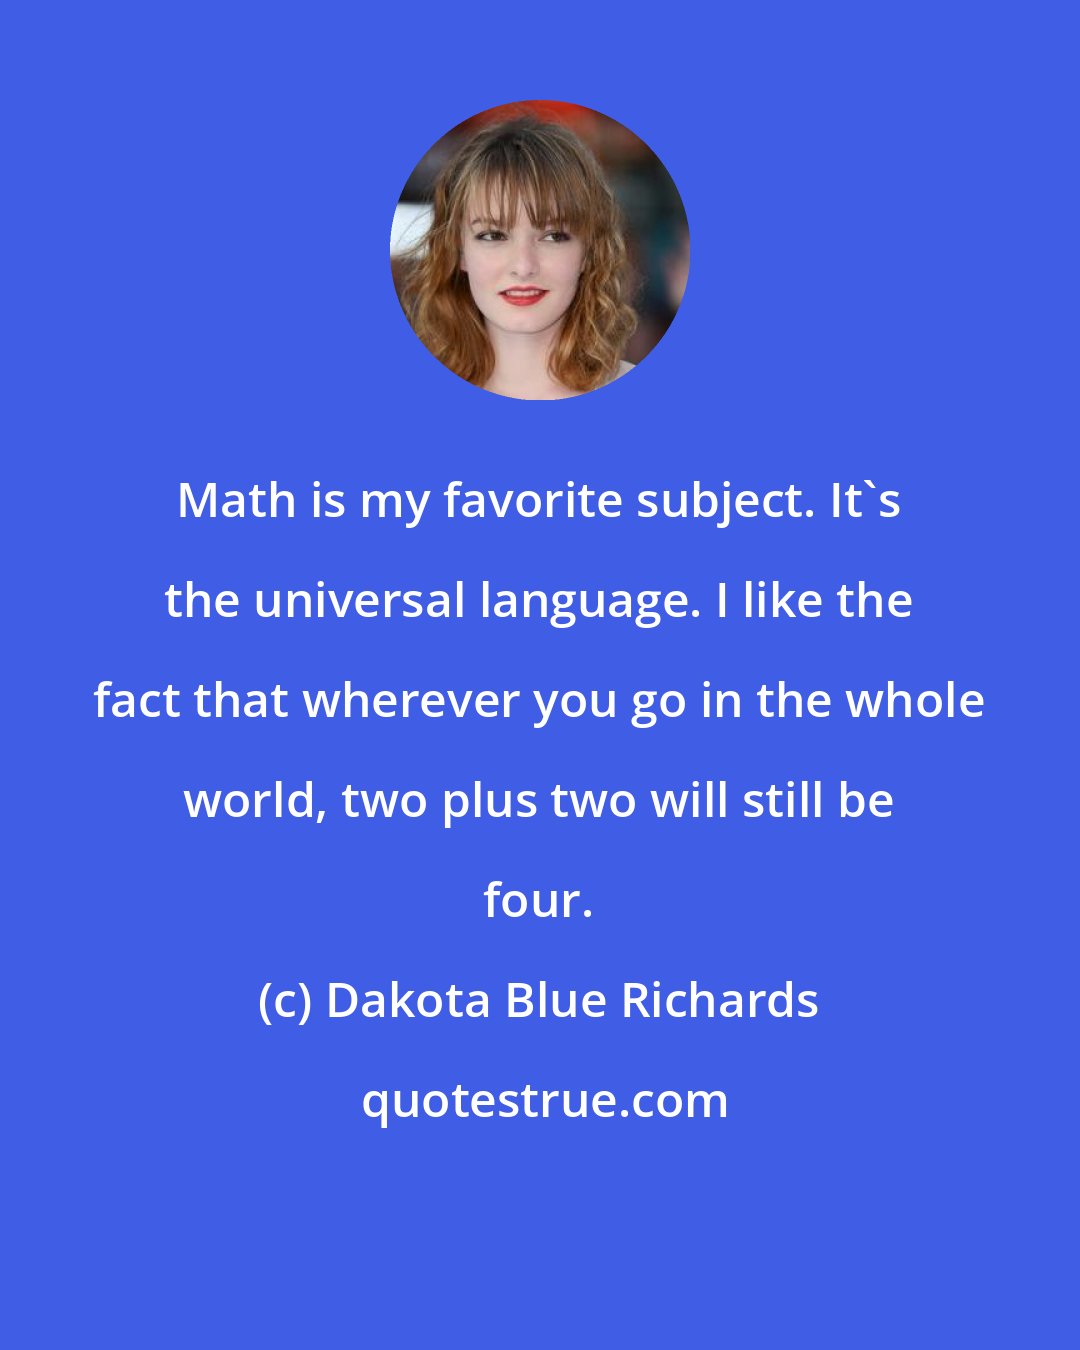 Dakota Blue Richards: Math is my favorite subject. It's the universal language. I like the fact that wherever you go in the whole world, two plus two will still be four.